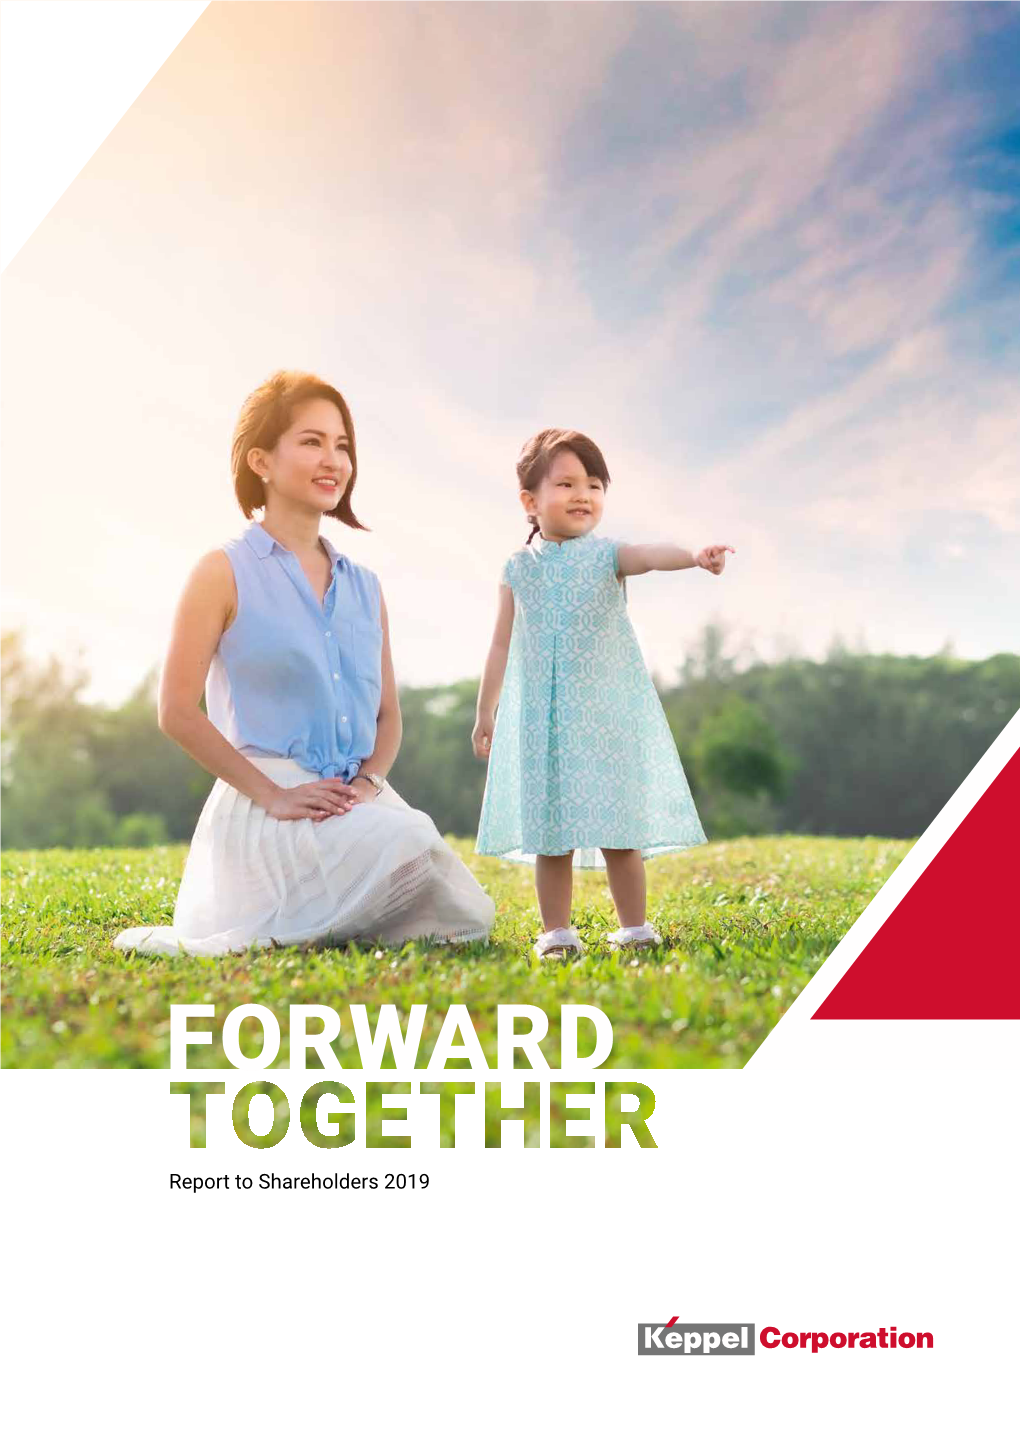 FORWARD TOGETHER Keppel to Corporation Shareholders 2019 Limited Report